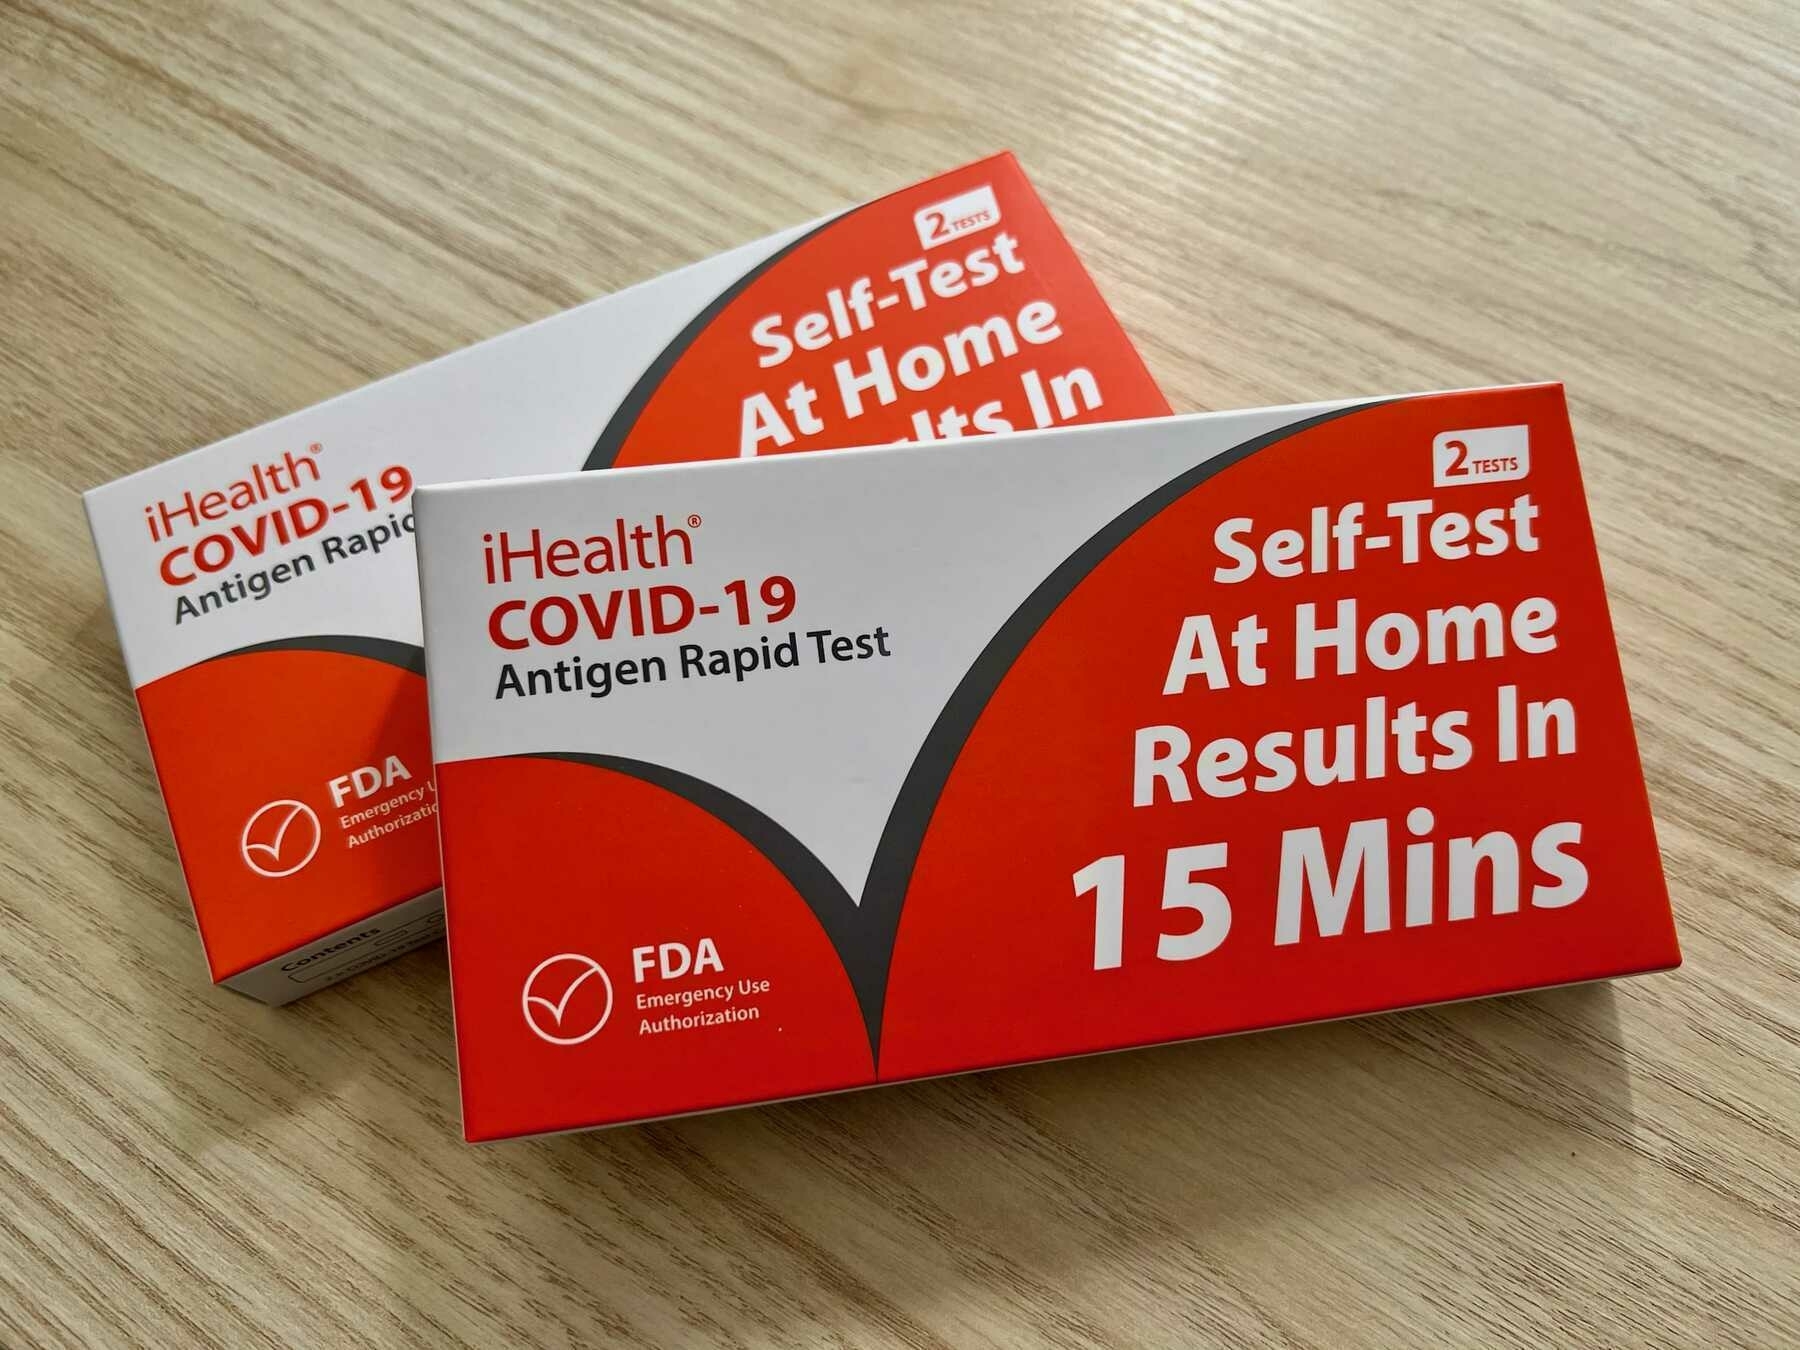 Two free FDA provided COVID tests.